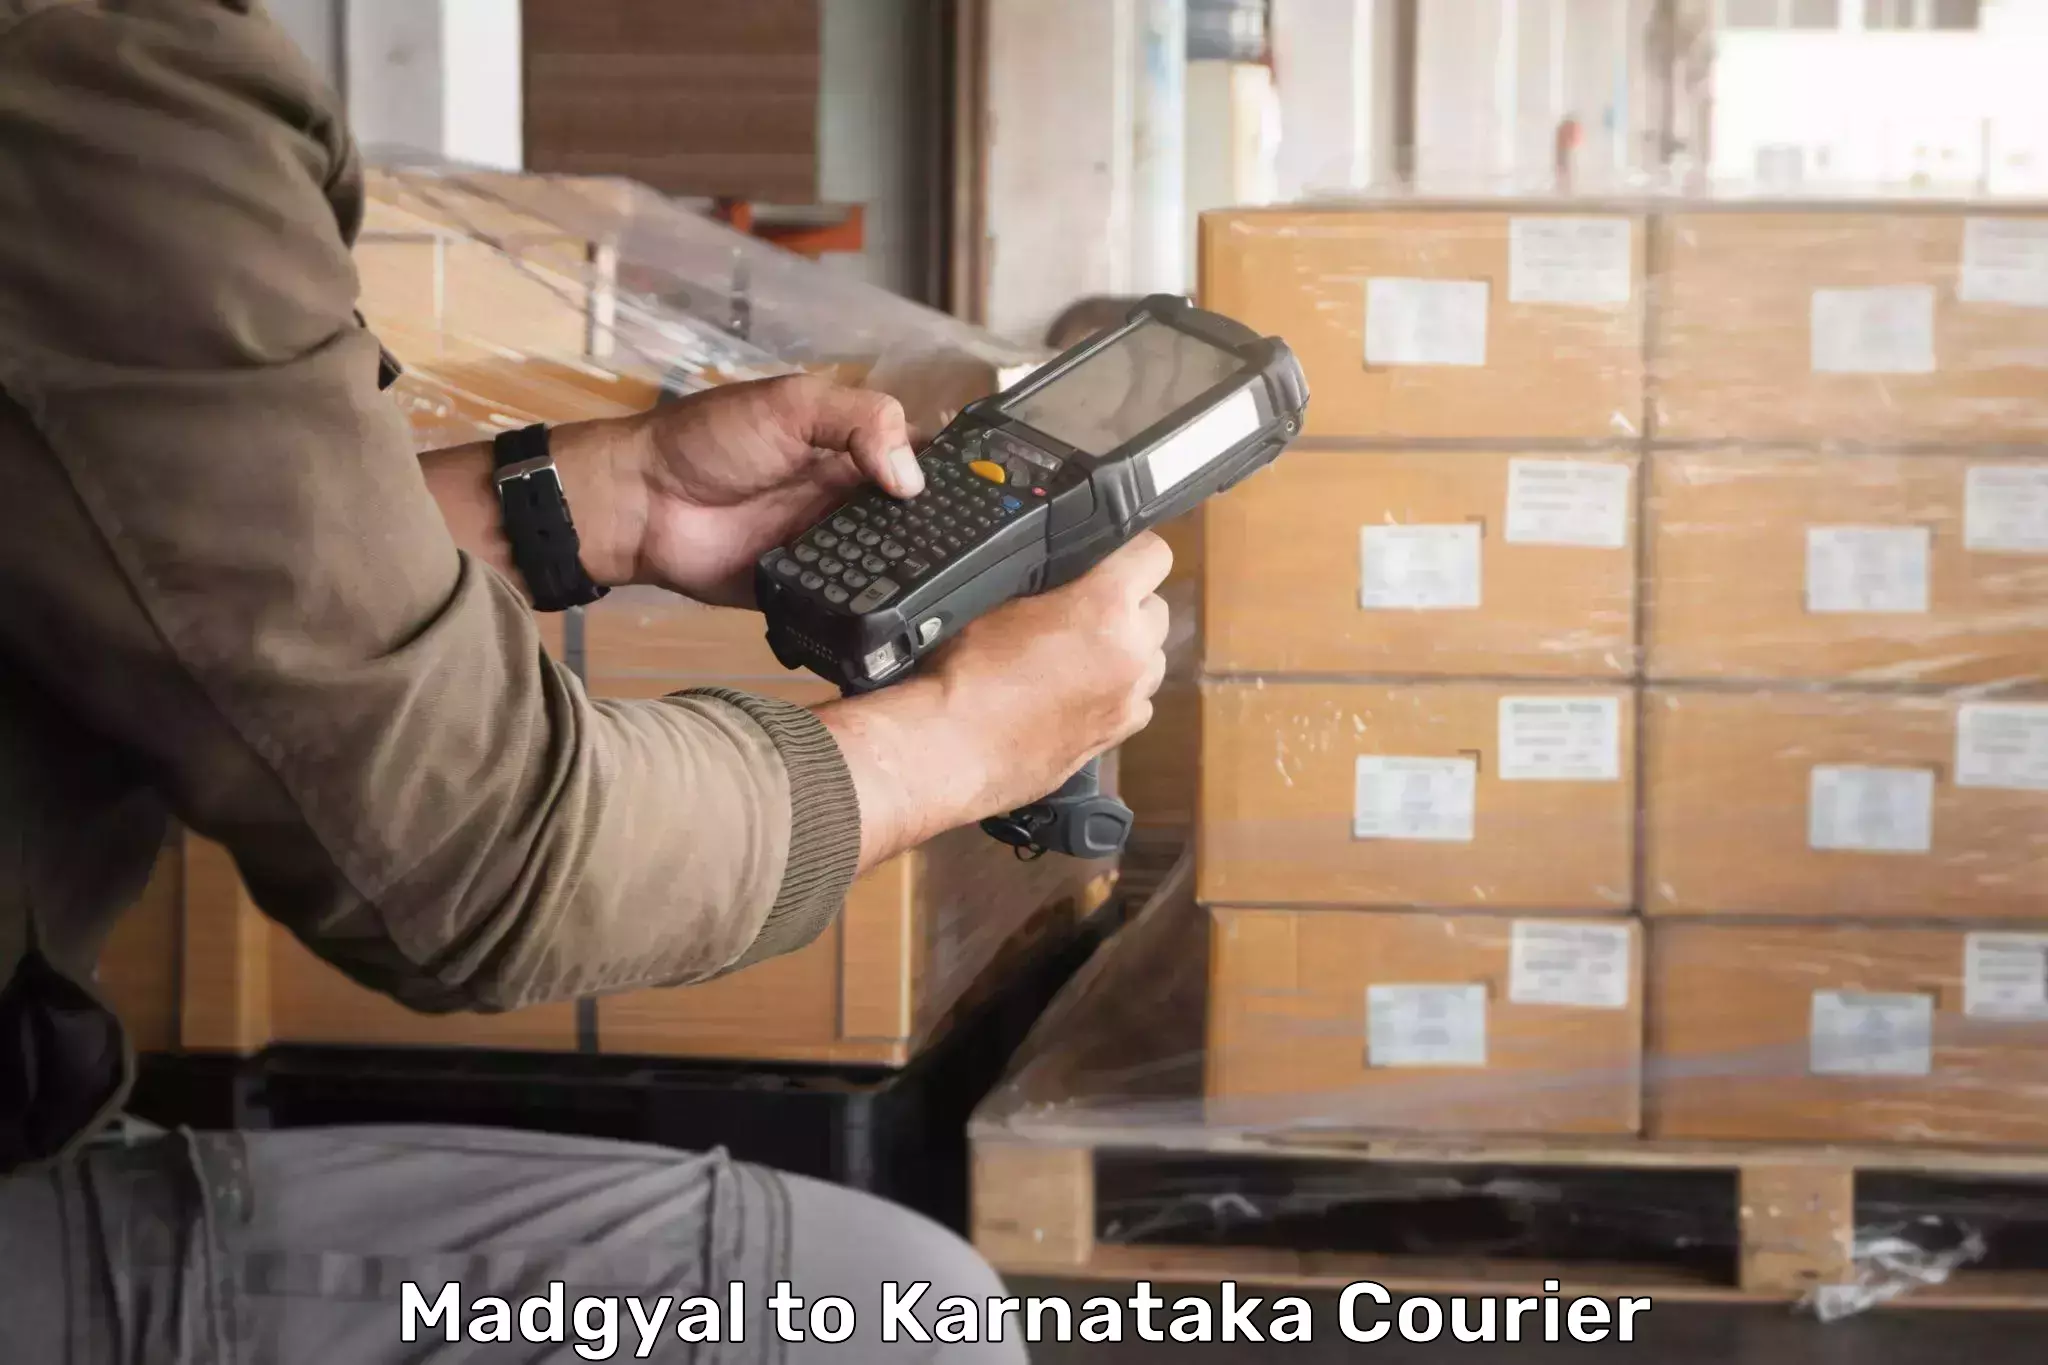 Courier service efficiency Madgyal to Mangalore Port